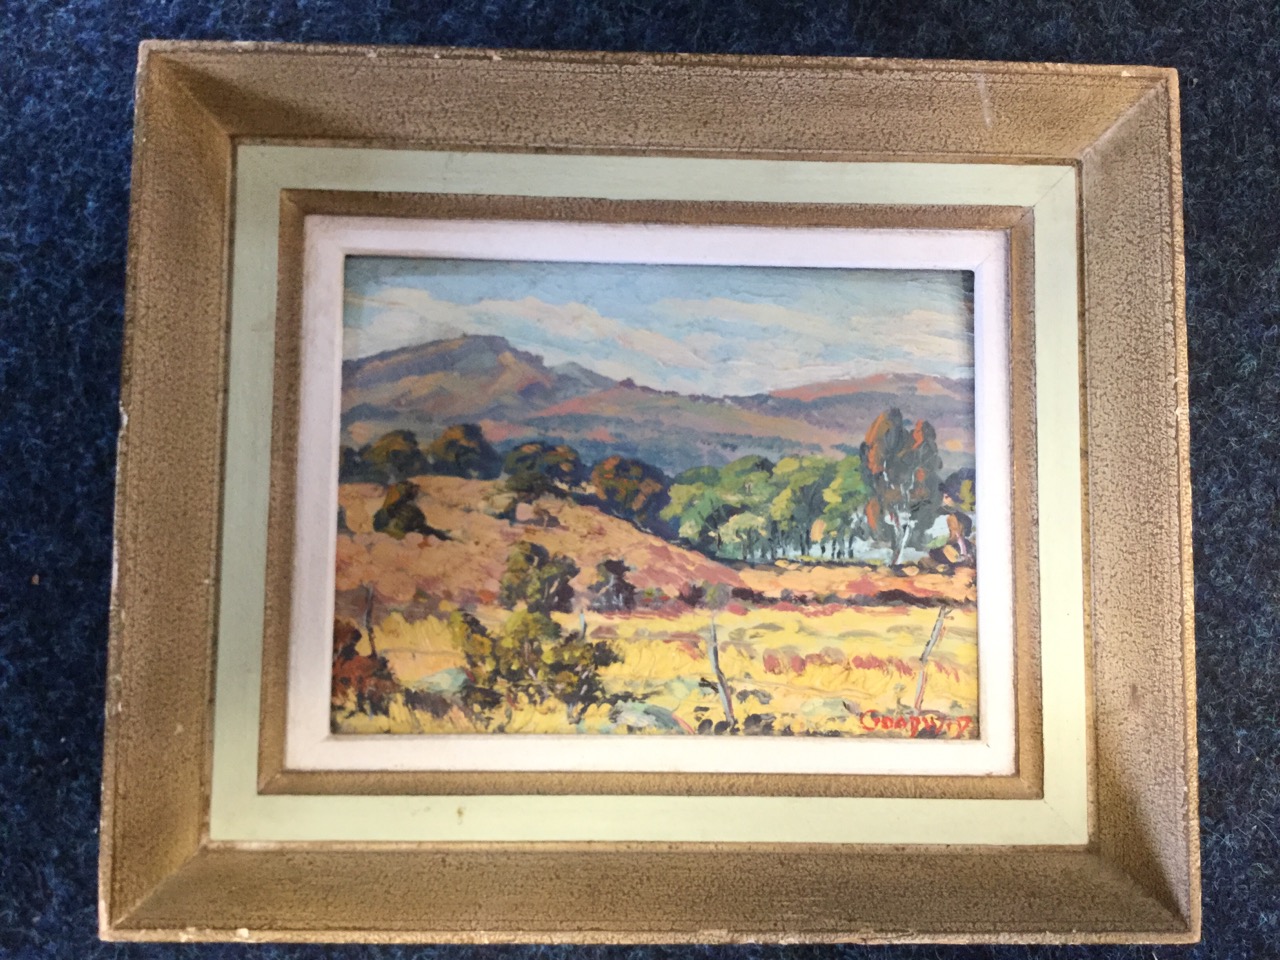 Goadwid, oil on board, landscape with trees looking over fence, signed indistinctly, framed, paper